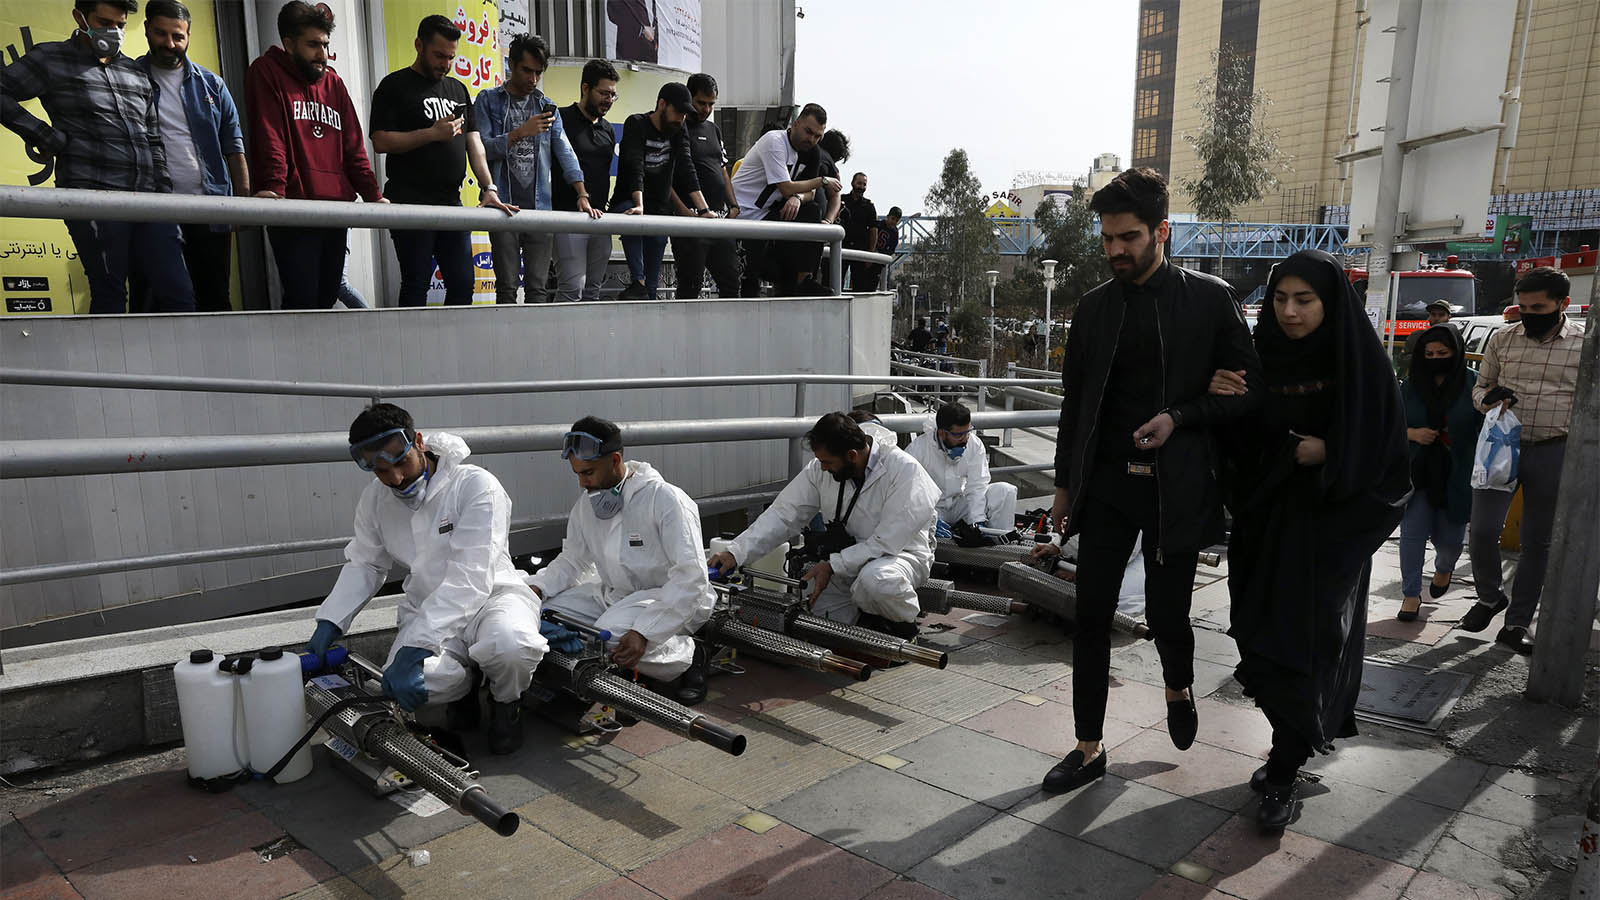 Fire services preparing to disinfect a central street in Tehran due to the coronavirus epidemic (Photograph: AP Phot/Vahid Salemi)